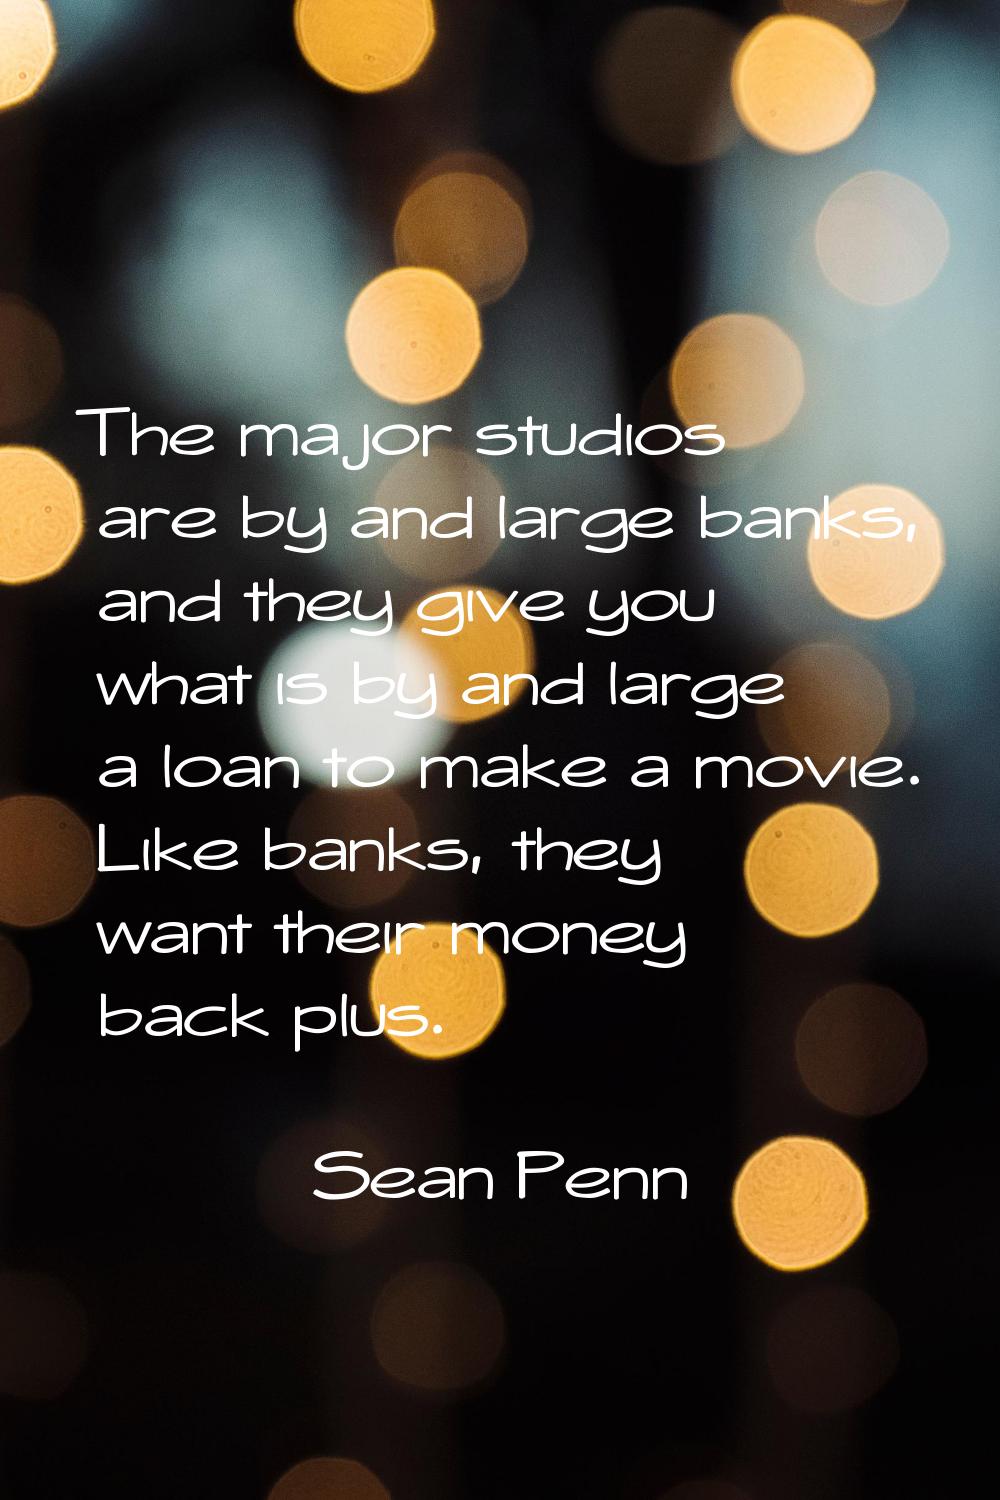 The major studios are by and large banks, and they give you what is by and large a loan to make a m